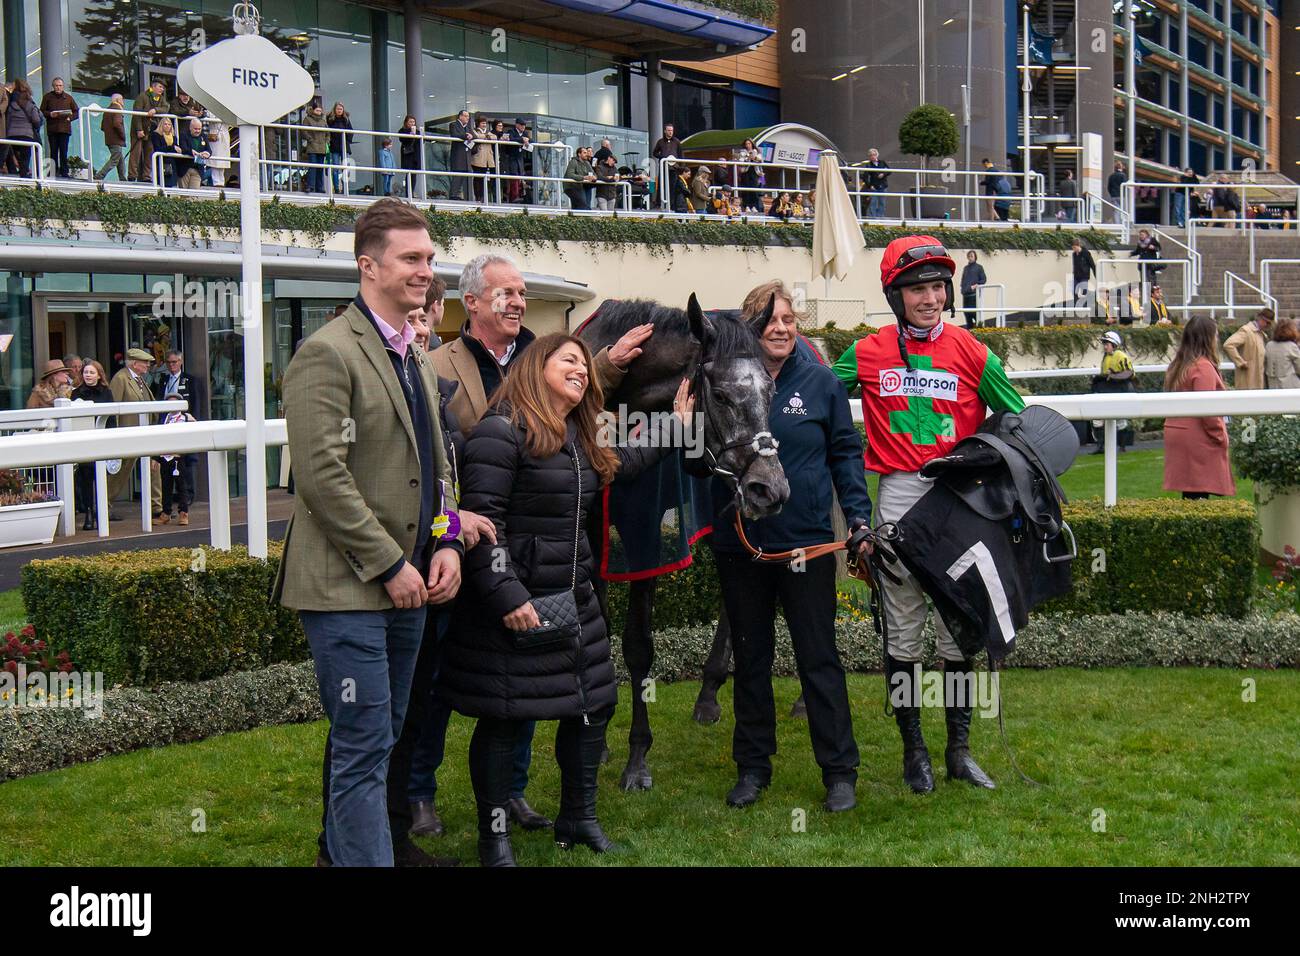 Ascot, Berkshire, UK. 18th February, 2023. Horse Irish Hill ridden by jockey Harry Cobden wins the Ascot Racecourse Supports Box4Kids Handicap Hurdle Race on the Betfair Ascot Chase Raceday at Ascot Racecourse. Horse Owner Sir Martin Broughton & Friends. Trainer Paul Nicholls, Ditcheat. Breeder Gestut Hachtsee. Sponsor Morson Group. Credit: Maureen McLean/Alamy Stock Photo